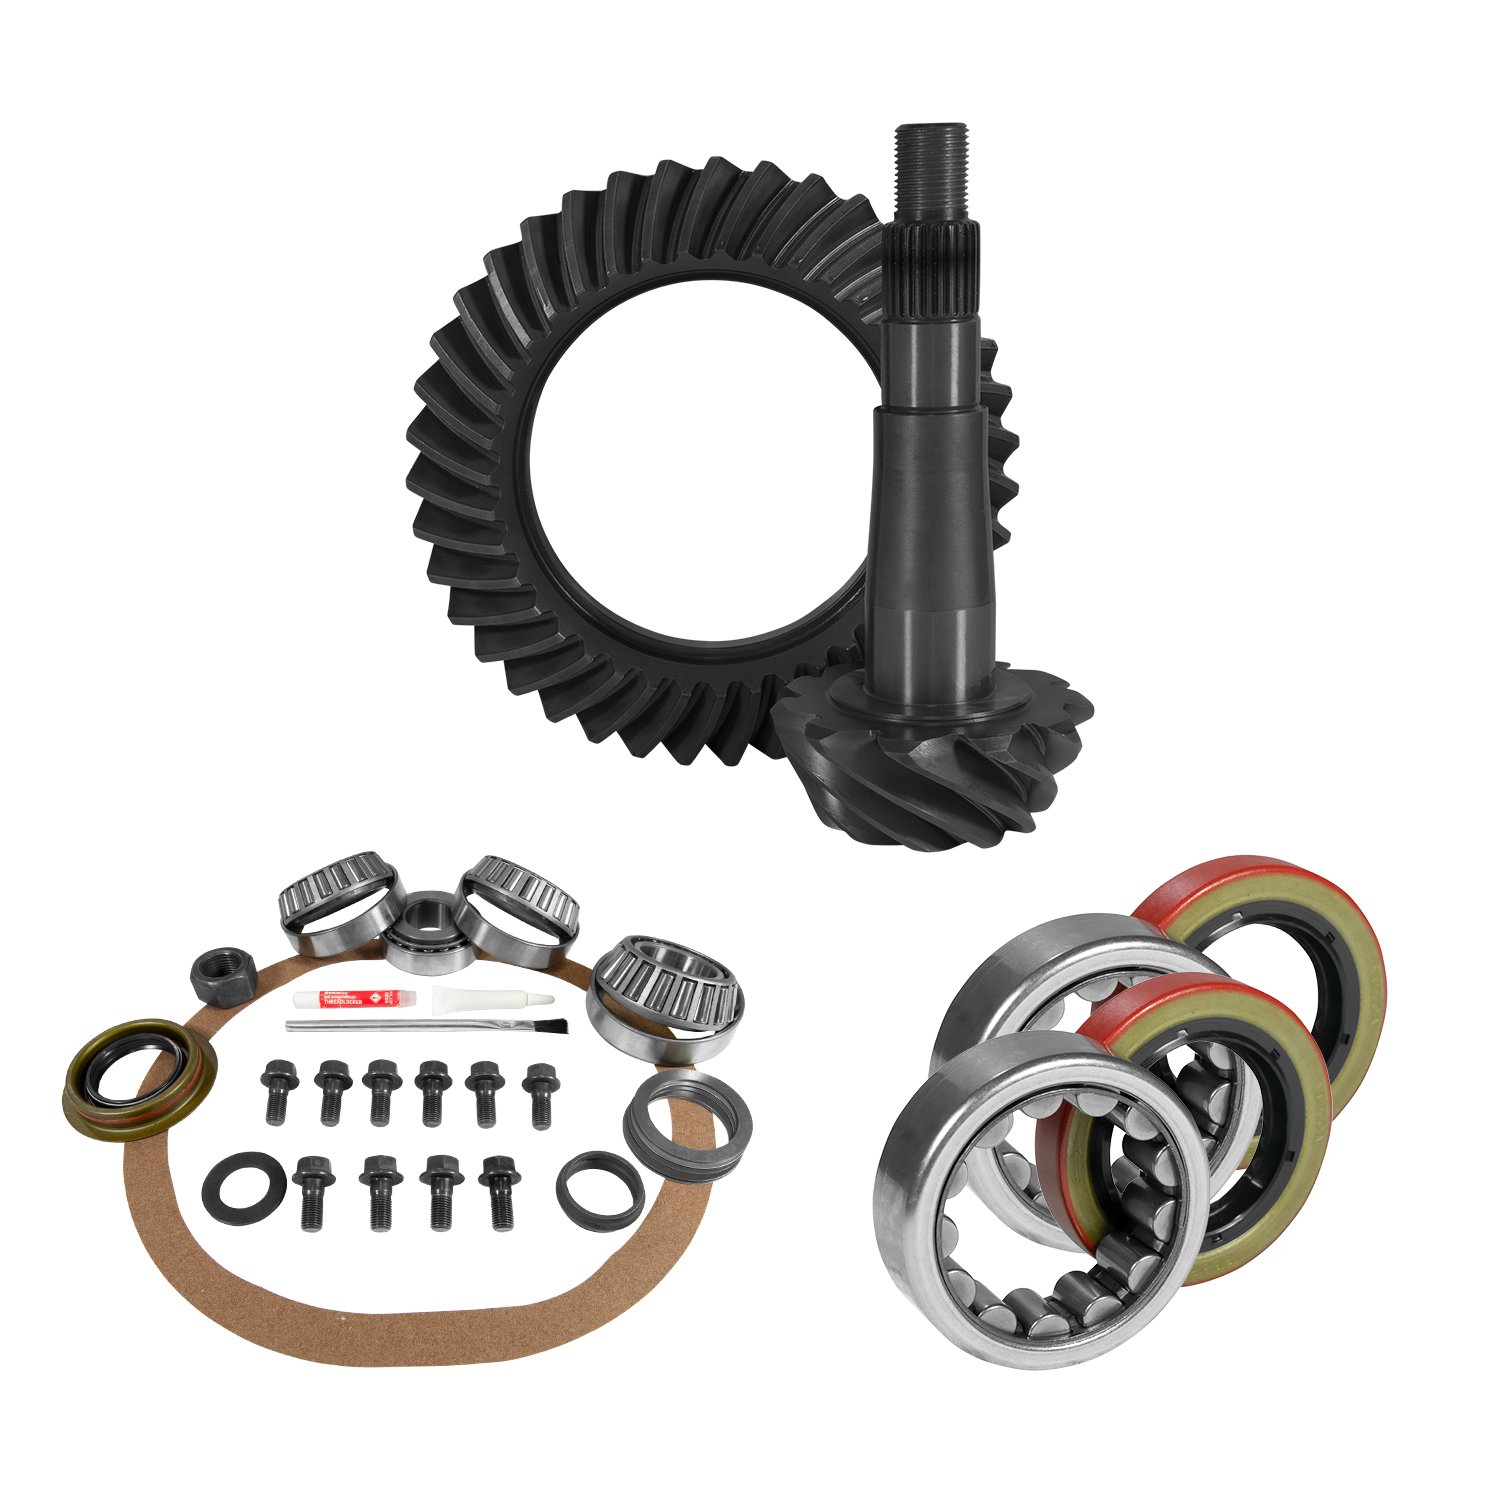 USA Standard 10900 8.25 in. Chy 3.73 Rear Ring & Pinion Install Kit, 1.618 in. Id Axle Bearings & Seals